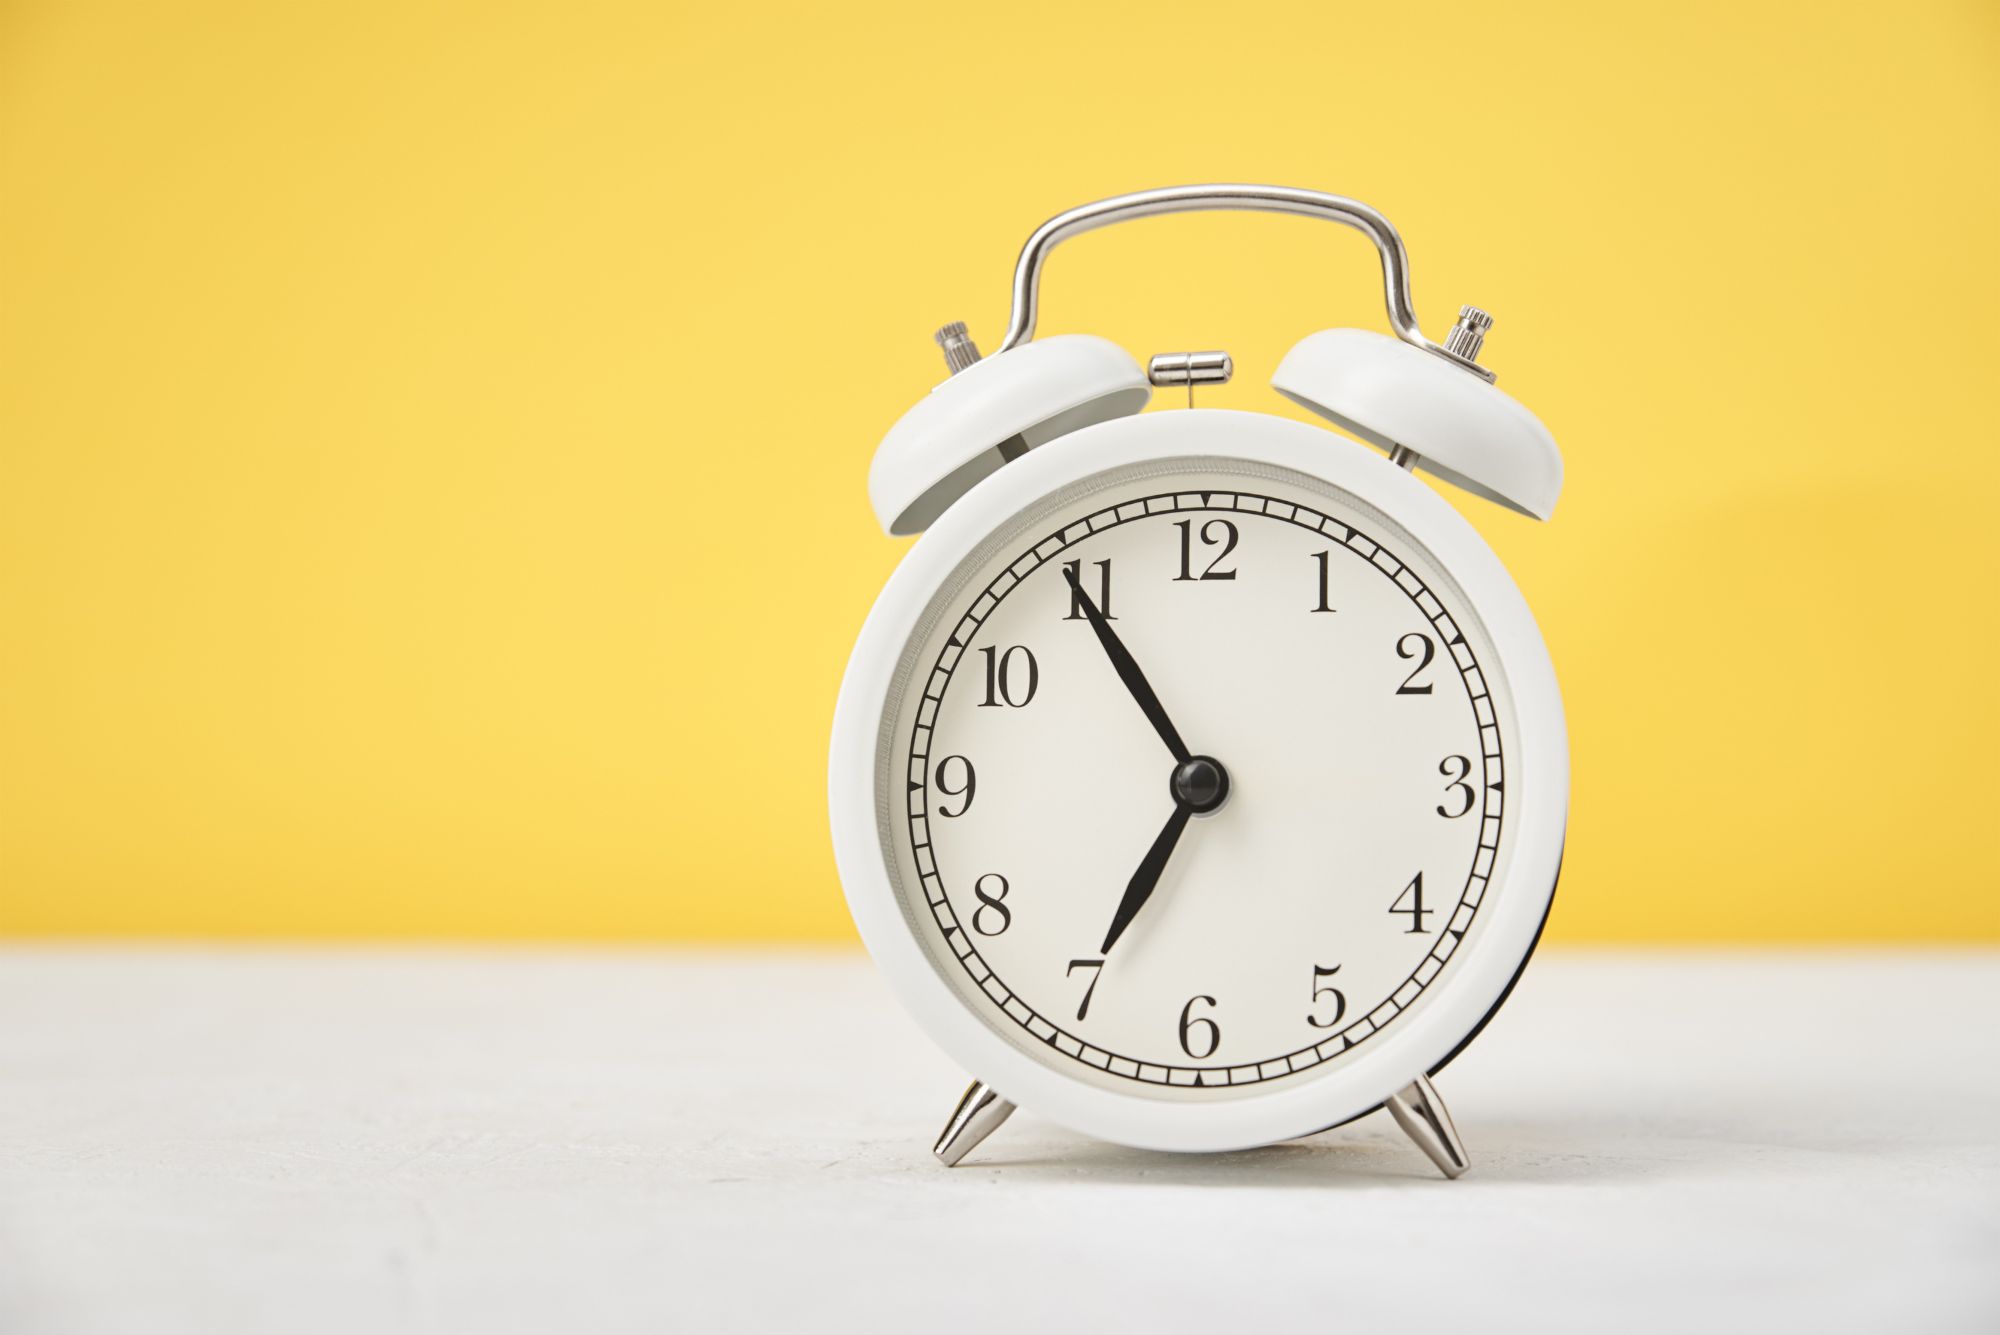 A white analog clock sits on a table against a yellow background